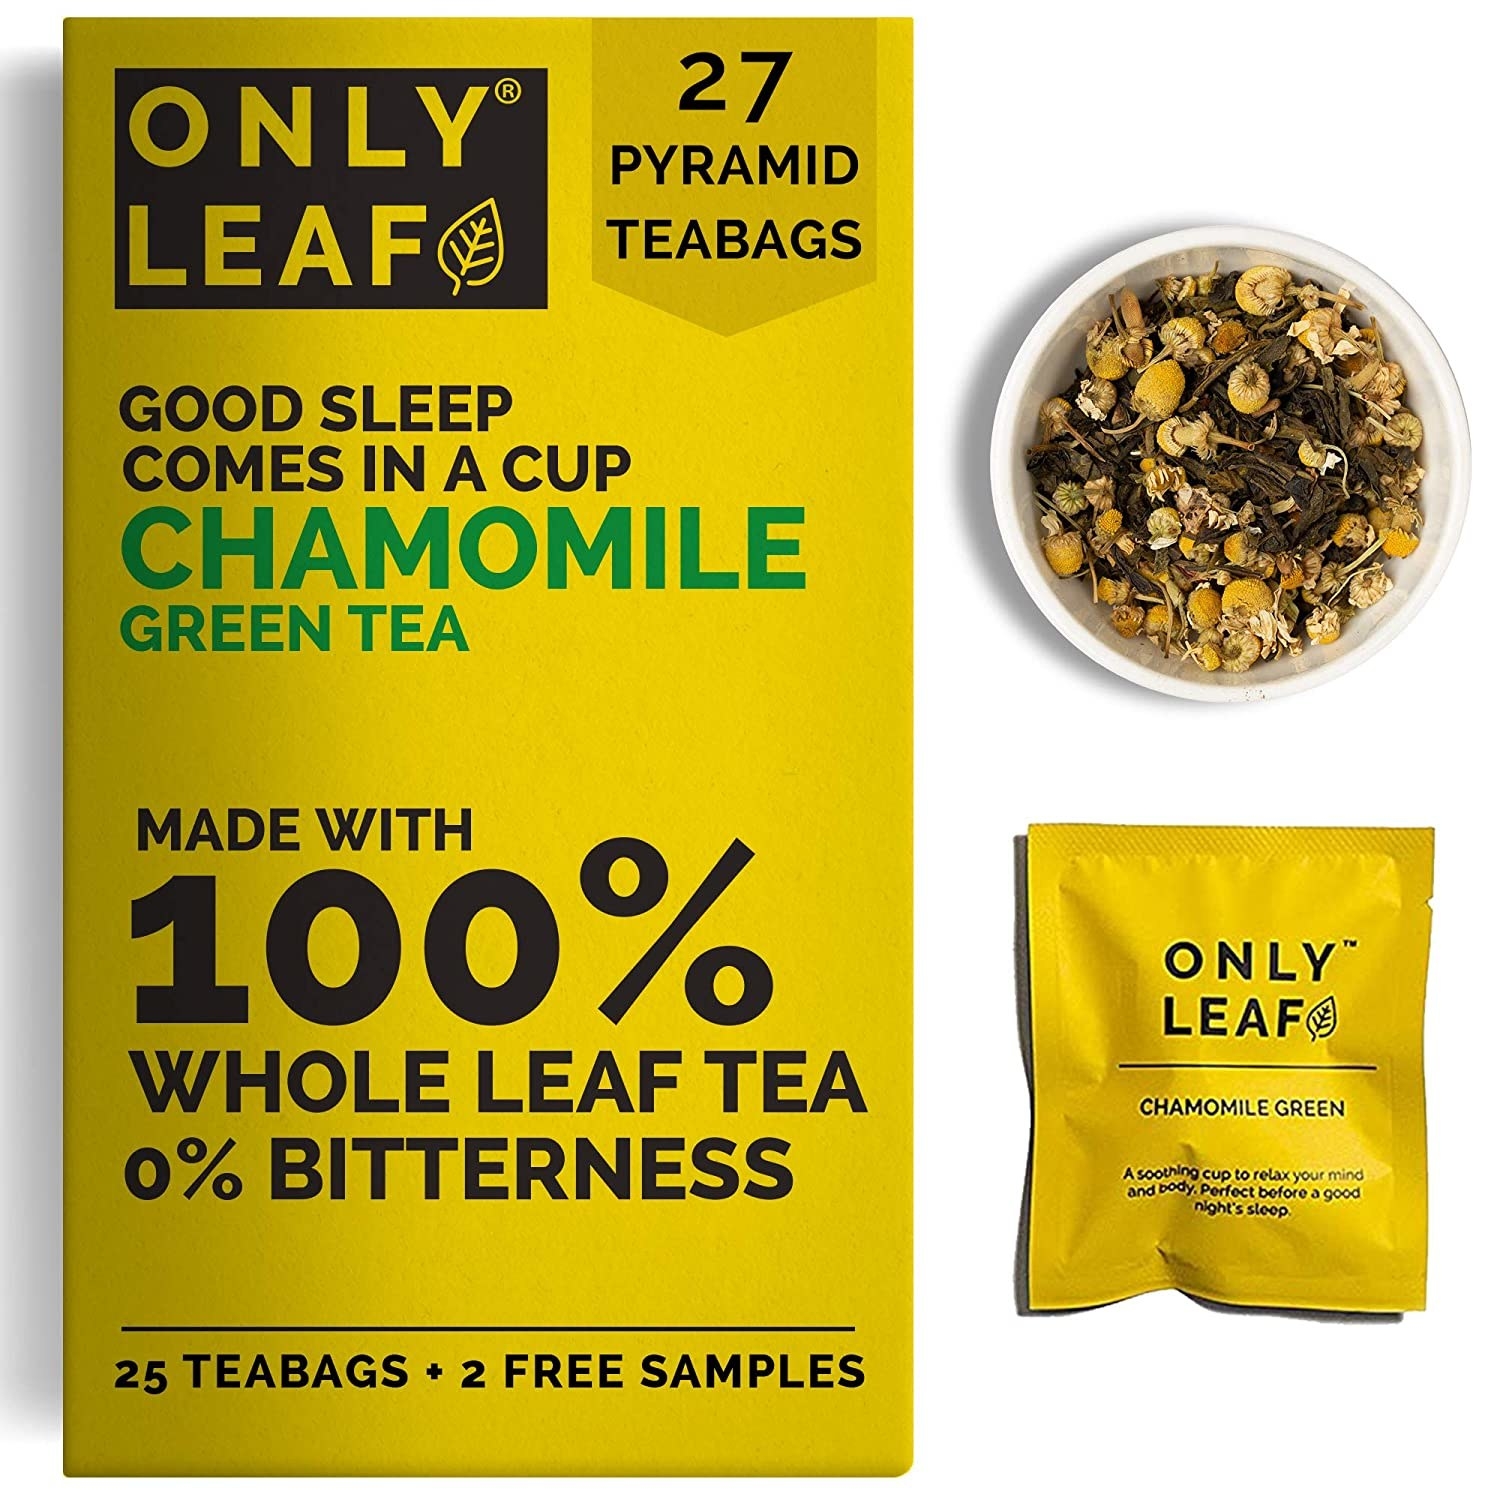 Only leaf chamomile tea bags